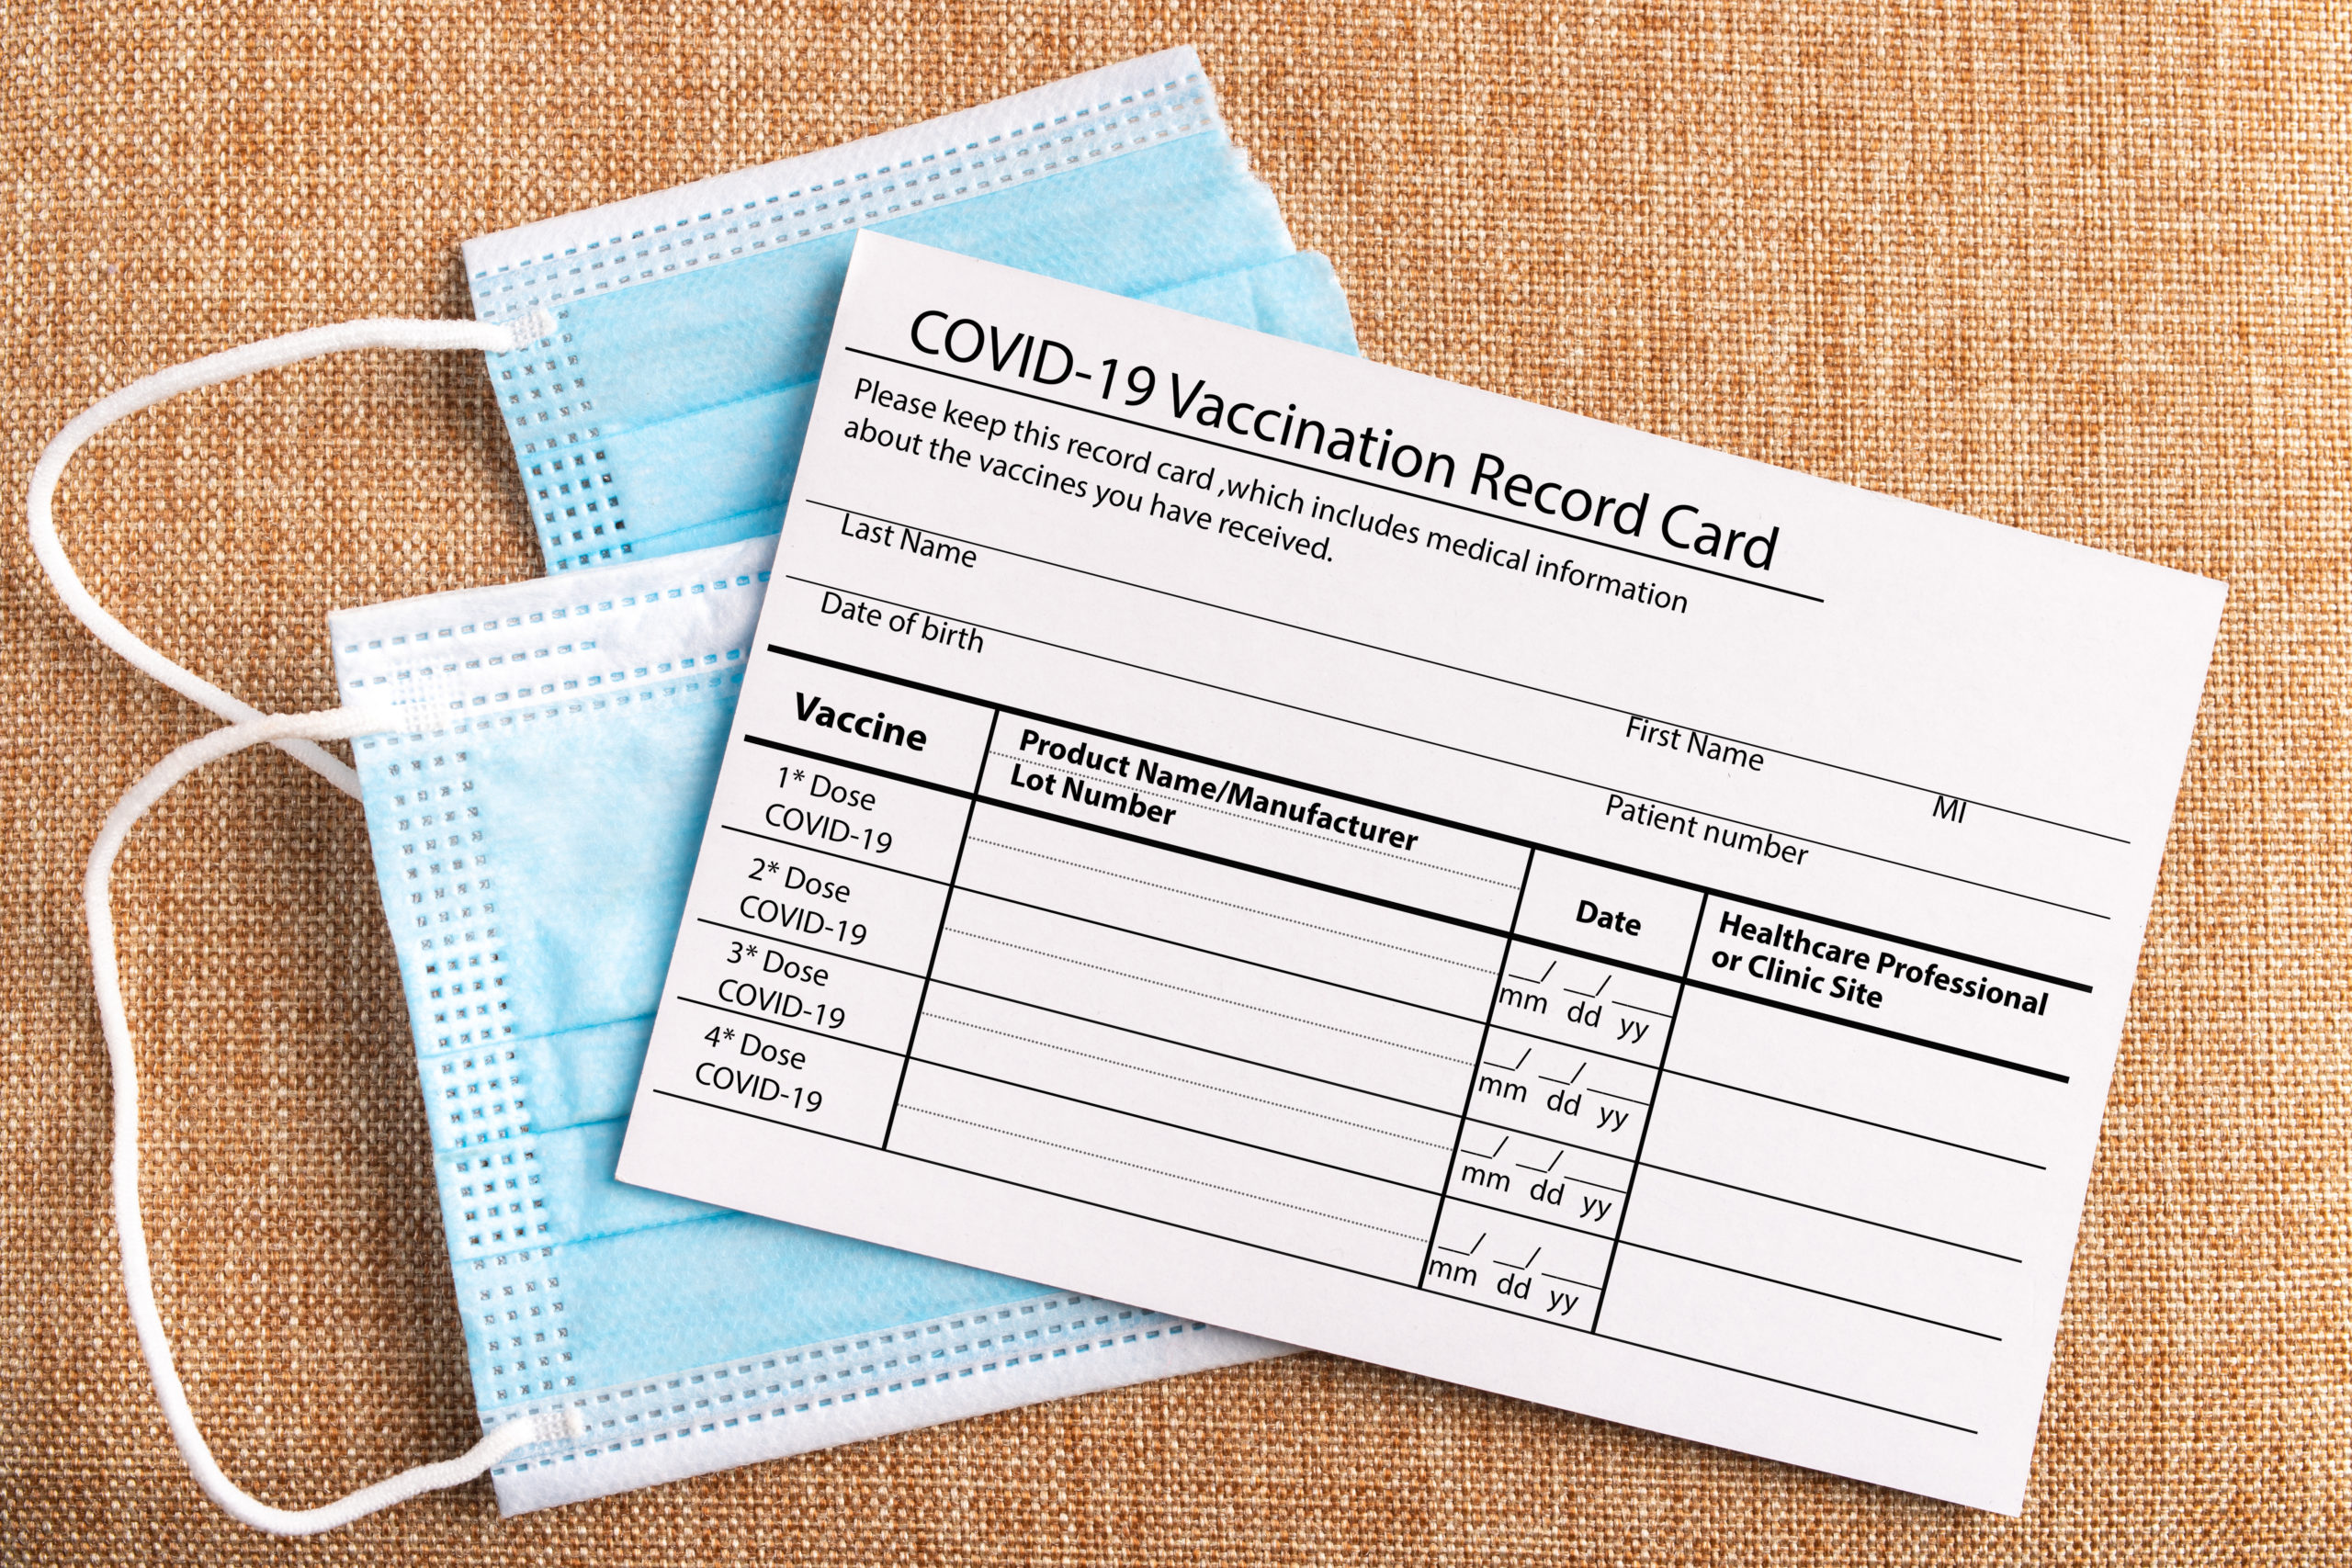 What Should You Do With Your COVID Vaccine Card? PeopleHype